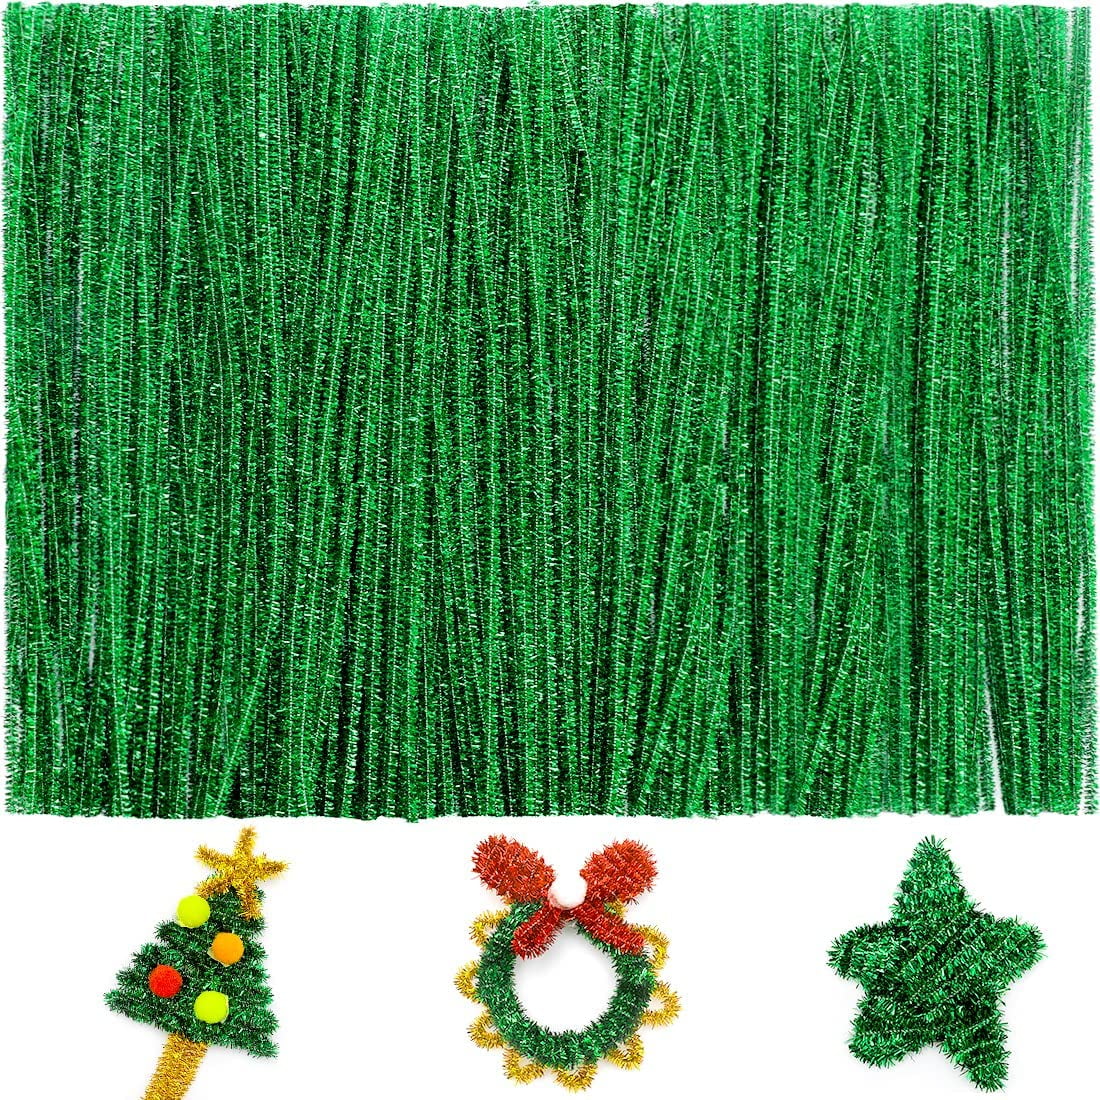 Pipe Cleaners, Glitter Pipe Cleaners Craft, Arts and Crafts, Crafts, Craft  Supplies, Art Supplies (200 Metallic-Colored Glitter Pipe Cleaners)…